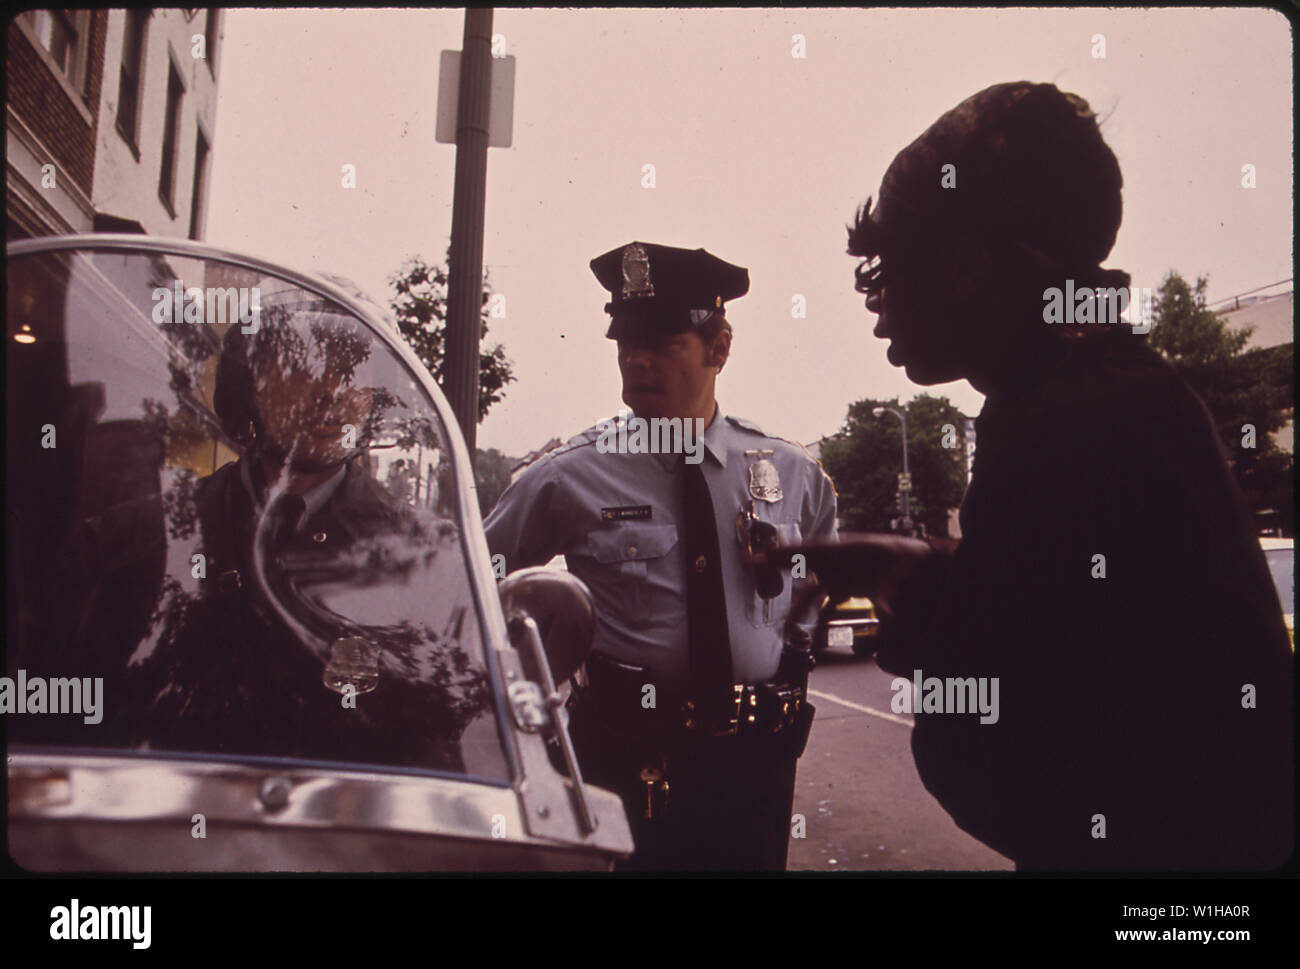 OFFICER CALLS PADDY WAGON FOR DISTURBER OF THE PEACE Stock Photo